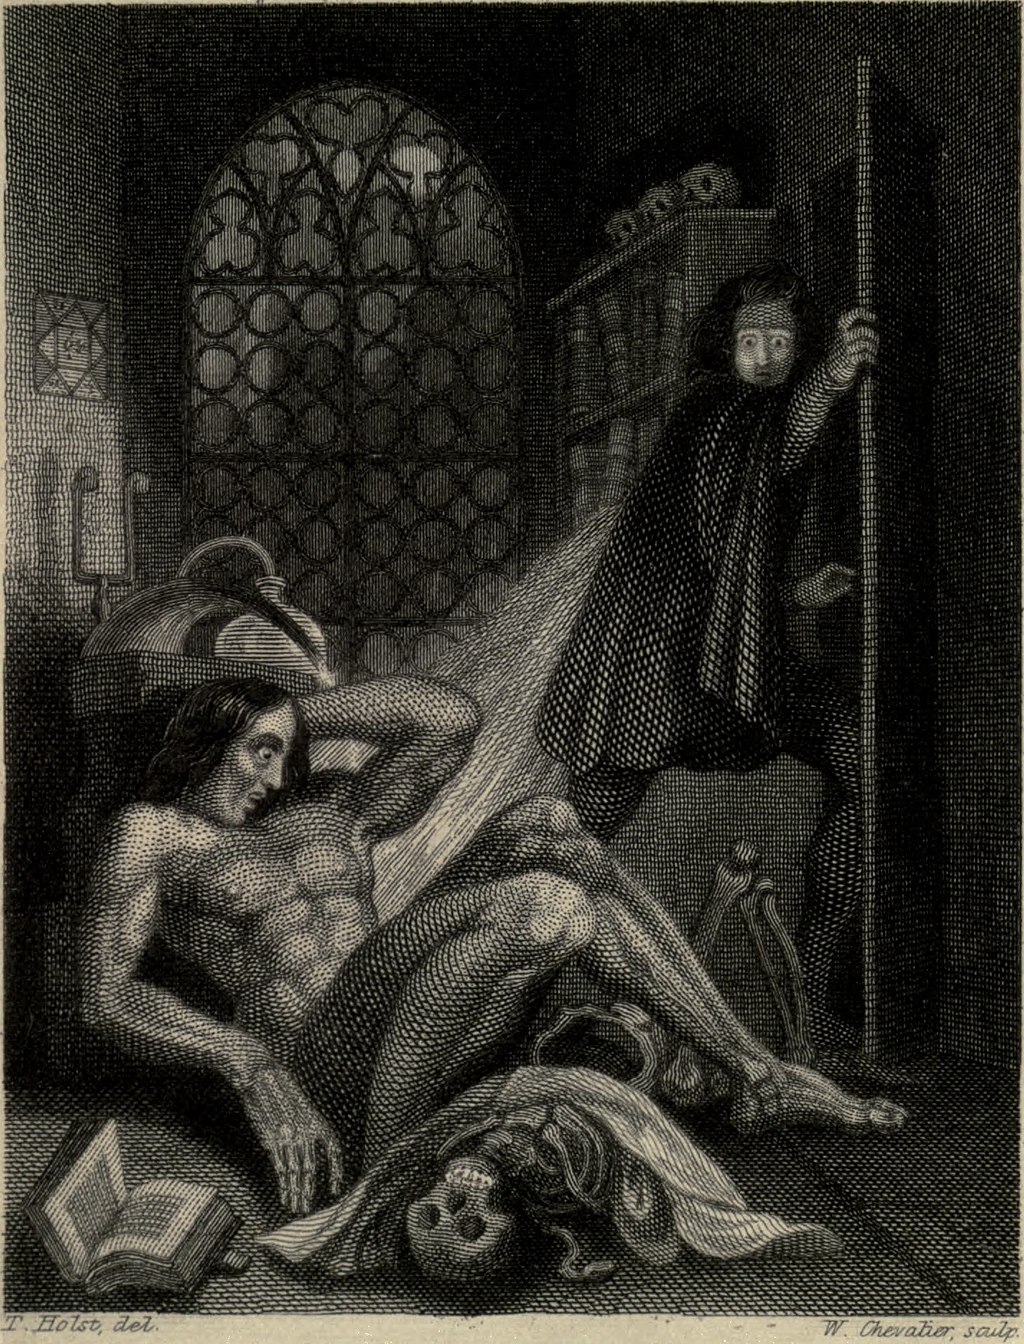 A black and white illustration of a man in a room with skeletons.